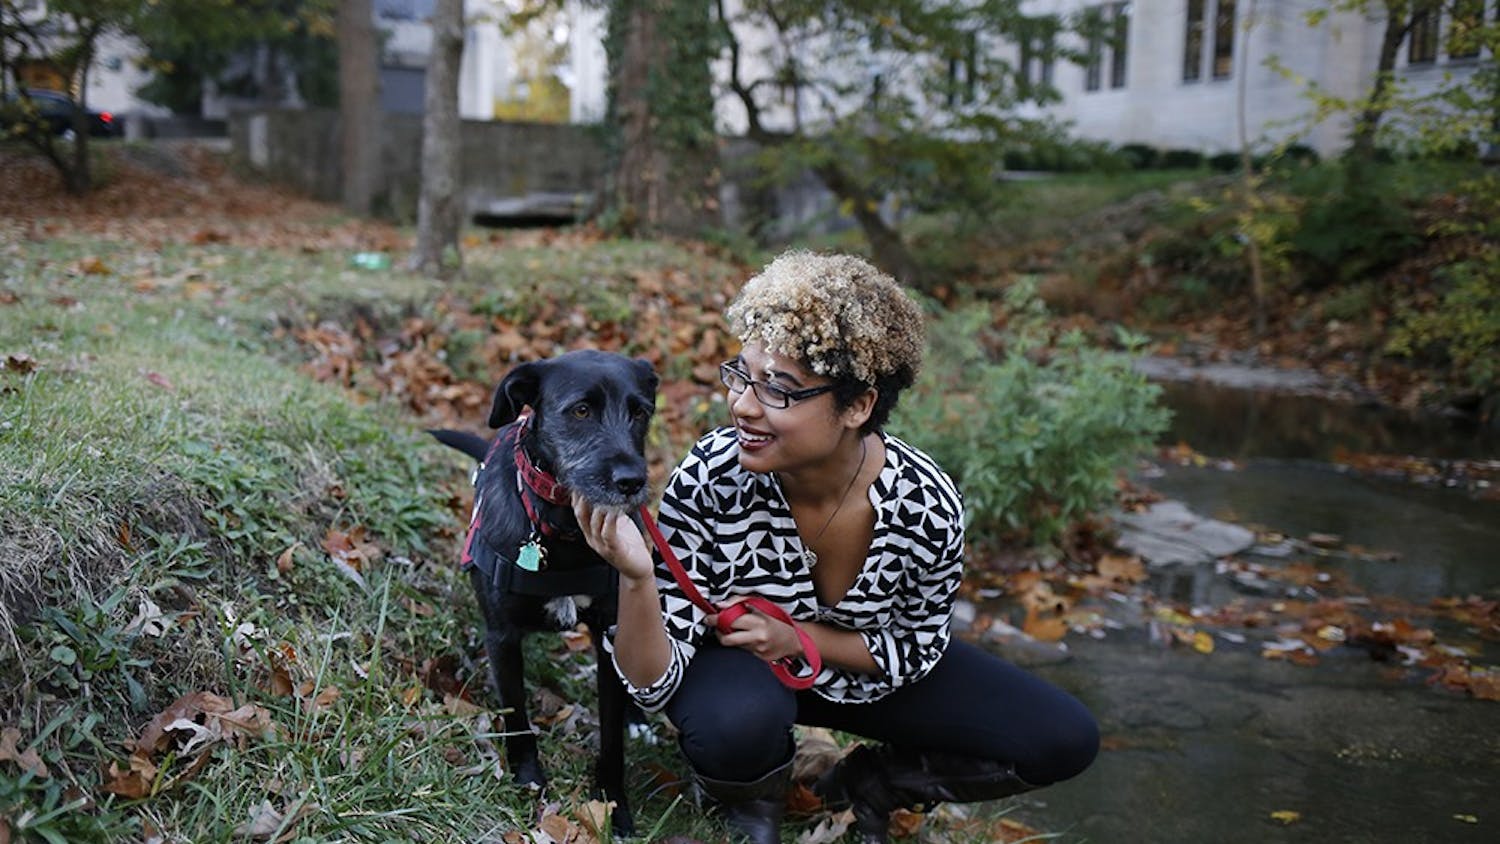 Freshman Kyla Jackson and Caper, her diabetic service sog, have been together since July 18th and go everywhere together. "I dont know what I would do without her," said Kyla. 

Caper lies by Kyla's feet whenever she is sitting and will nudge her hand whenever there is a change in her blood sugar level.
